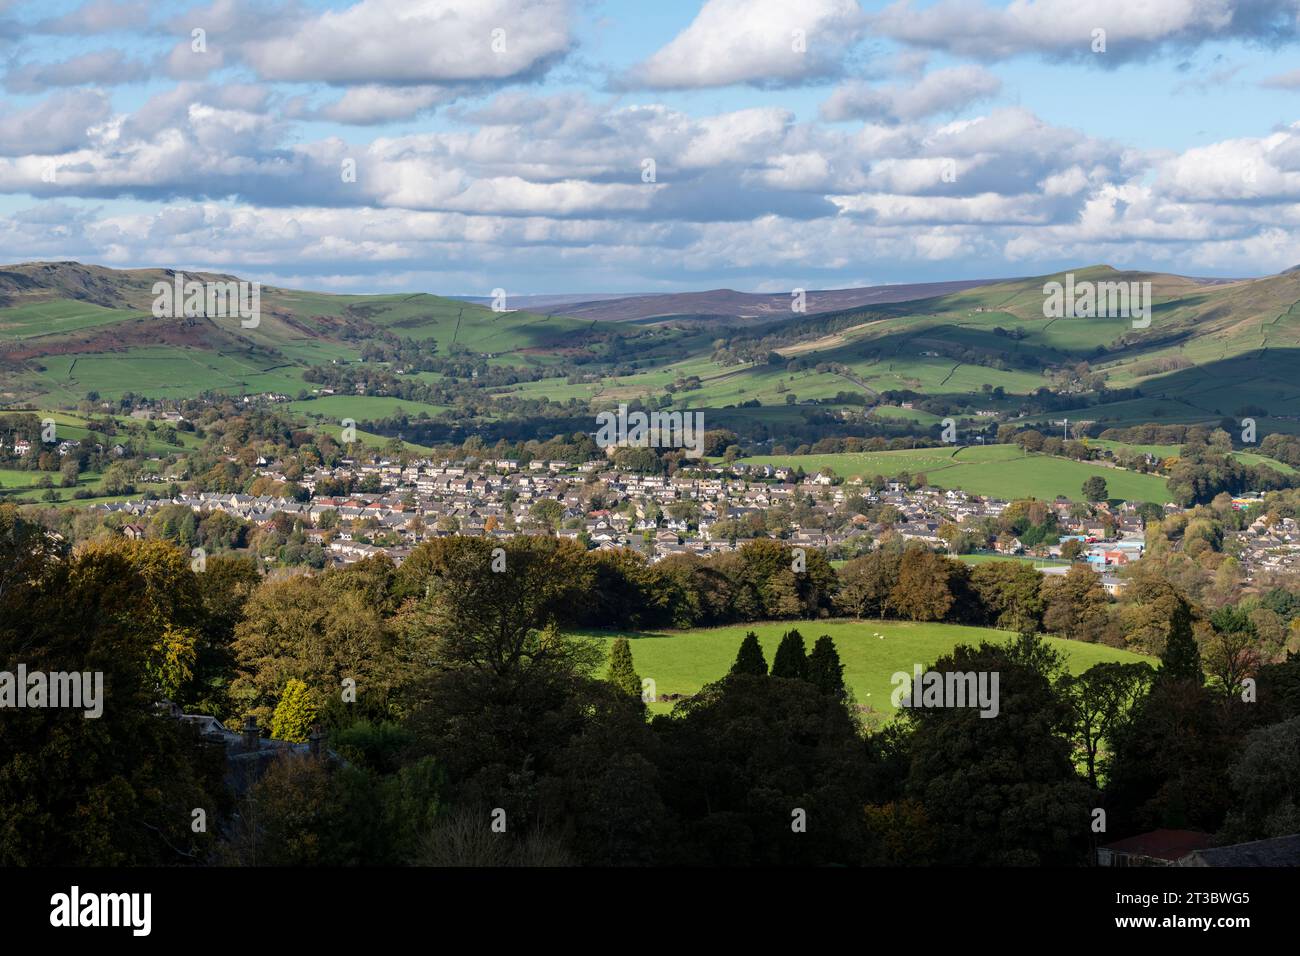 The town of Chapel-en-le-Frith seen from Combs Edge in Derbyshire, England. Stock Photo